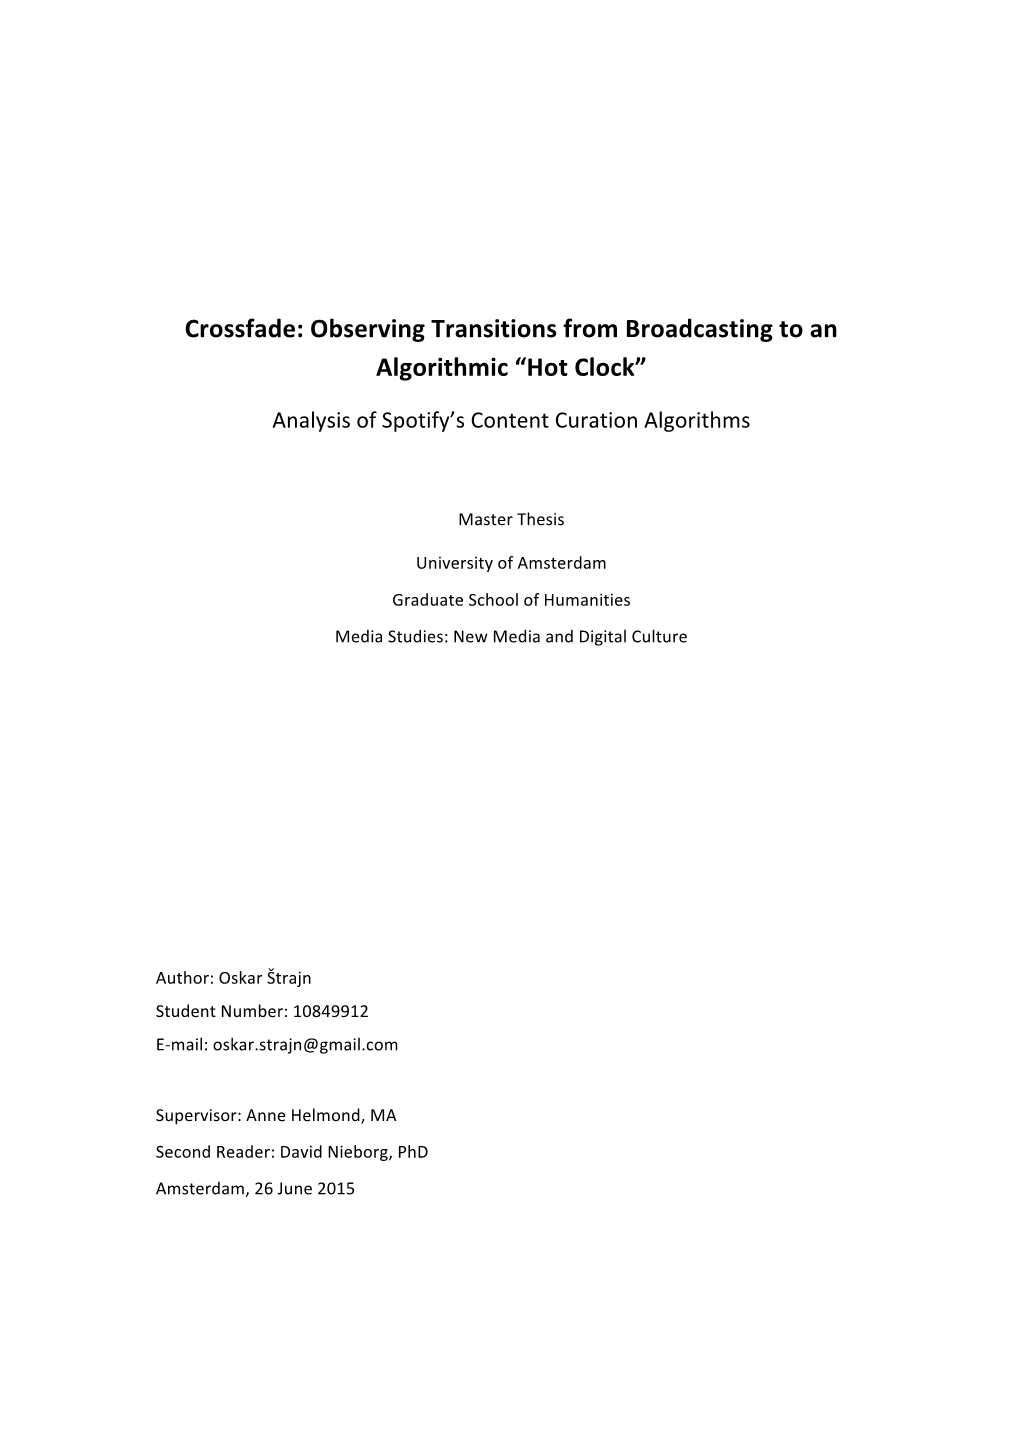 Crossfade: Observing Transitions from Broadcasting to an Algorithmic “Hot Clock”